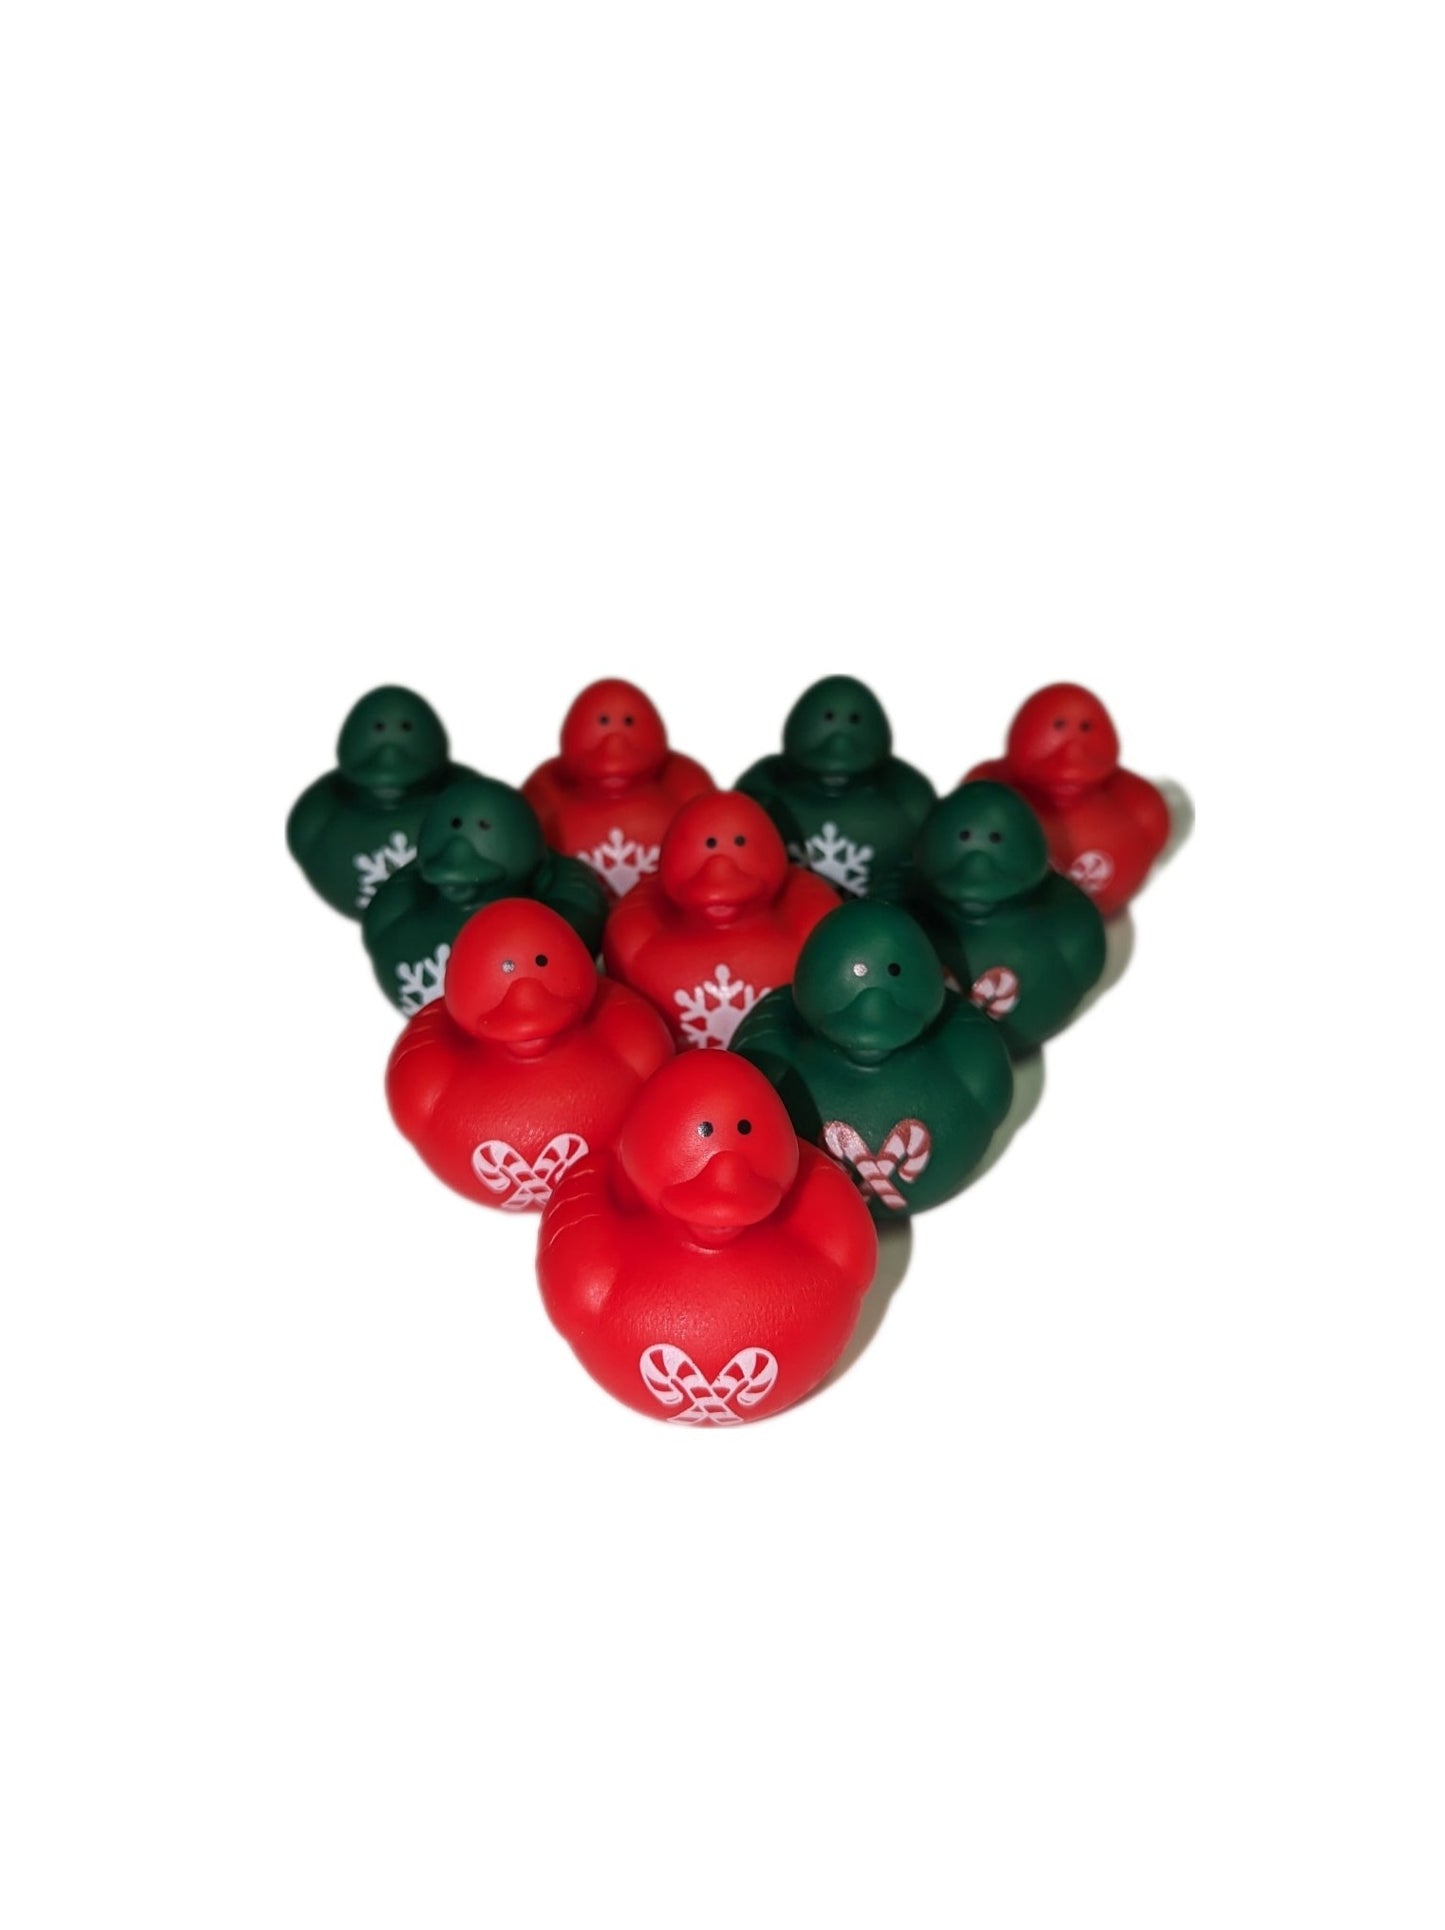 10 Holiday Red and Green Ducks - 2" Rubber Ducks